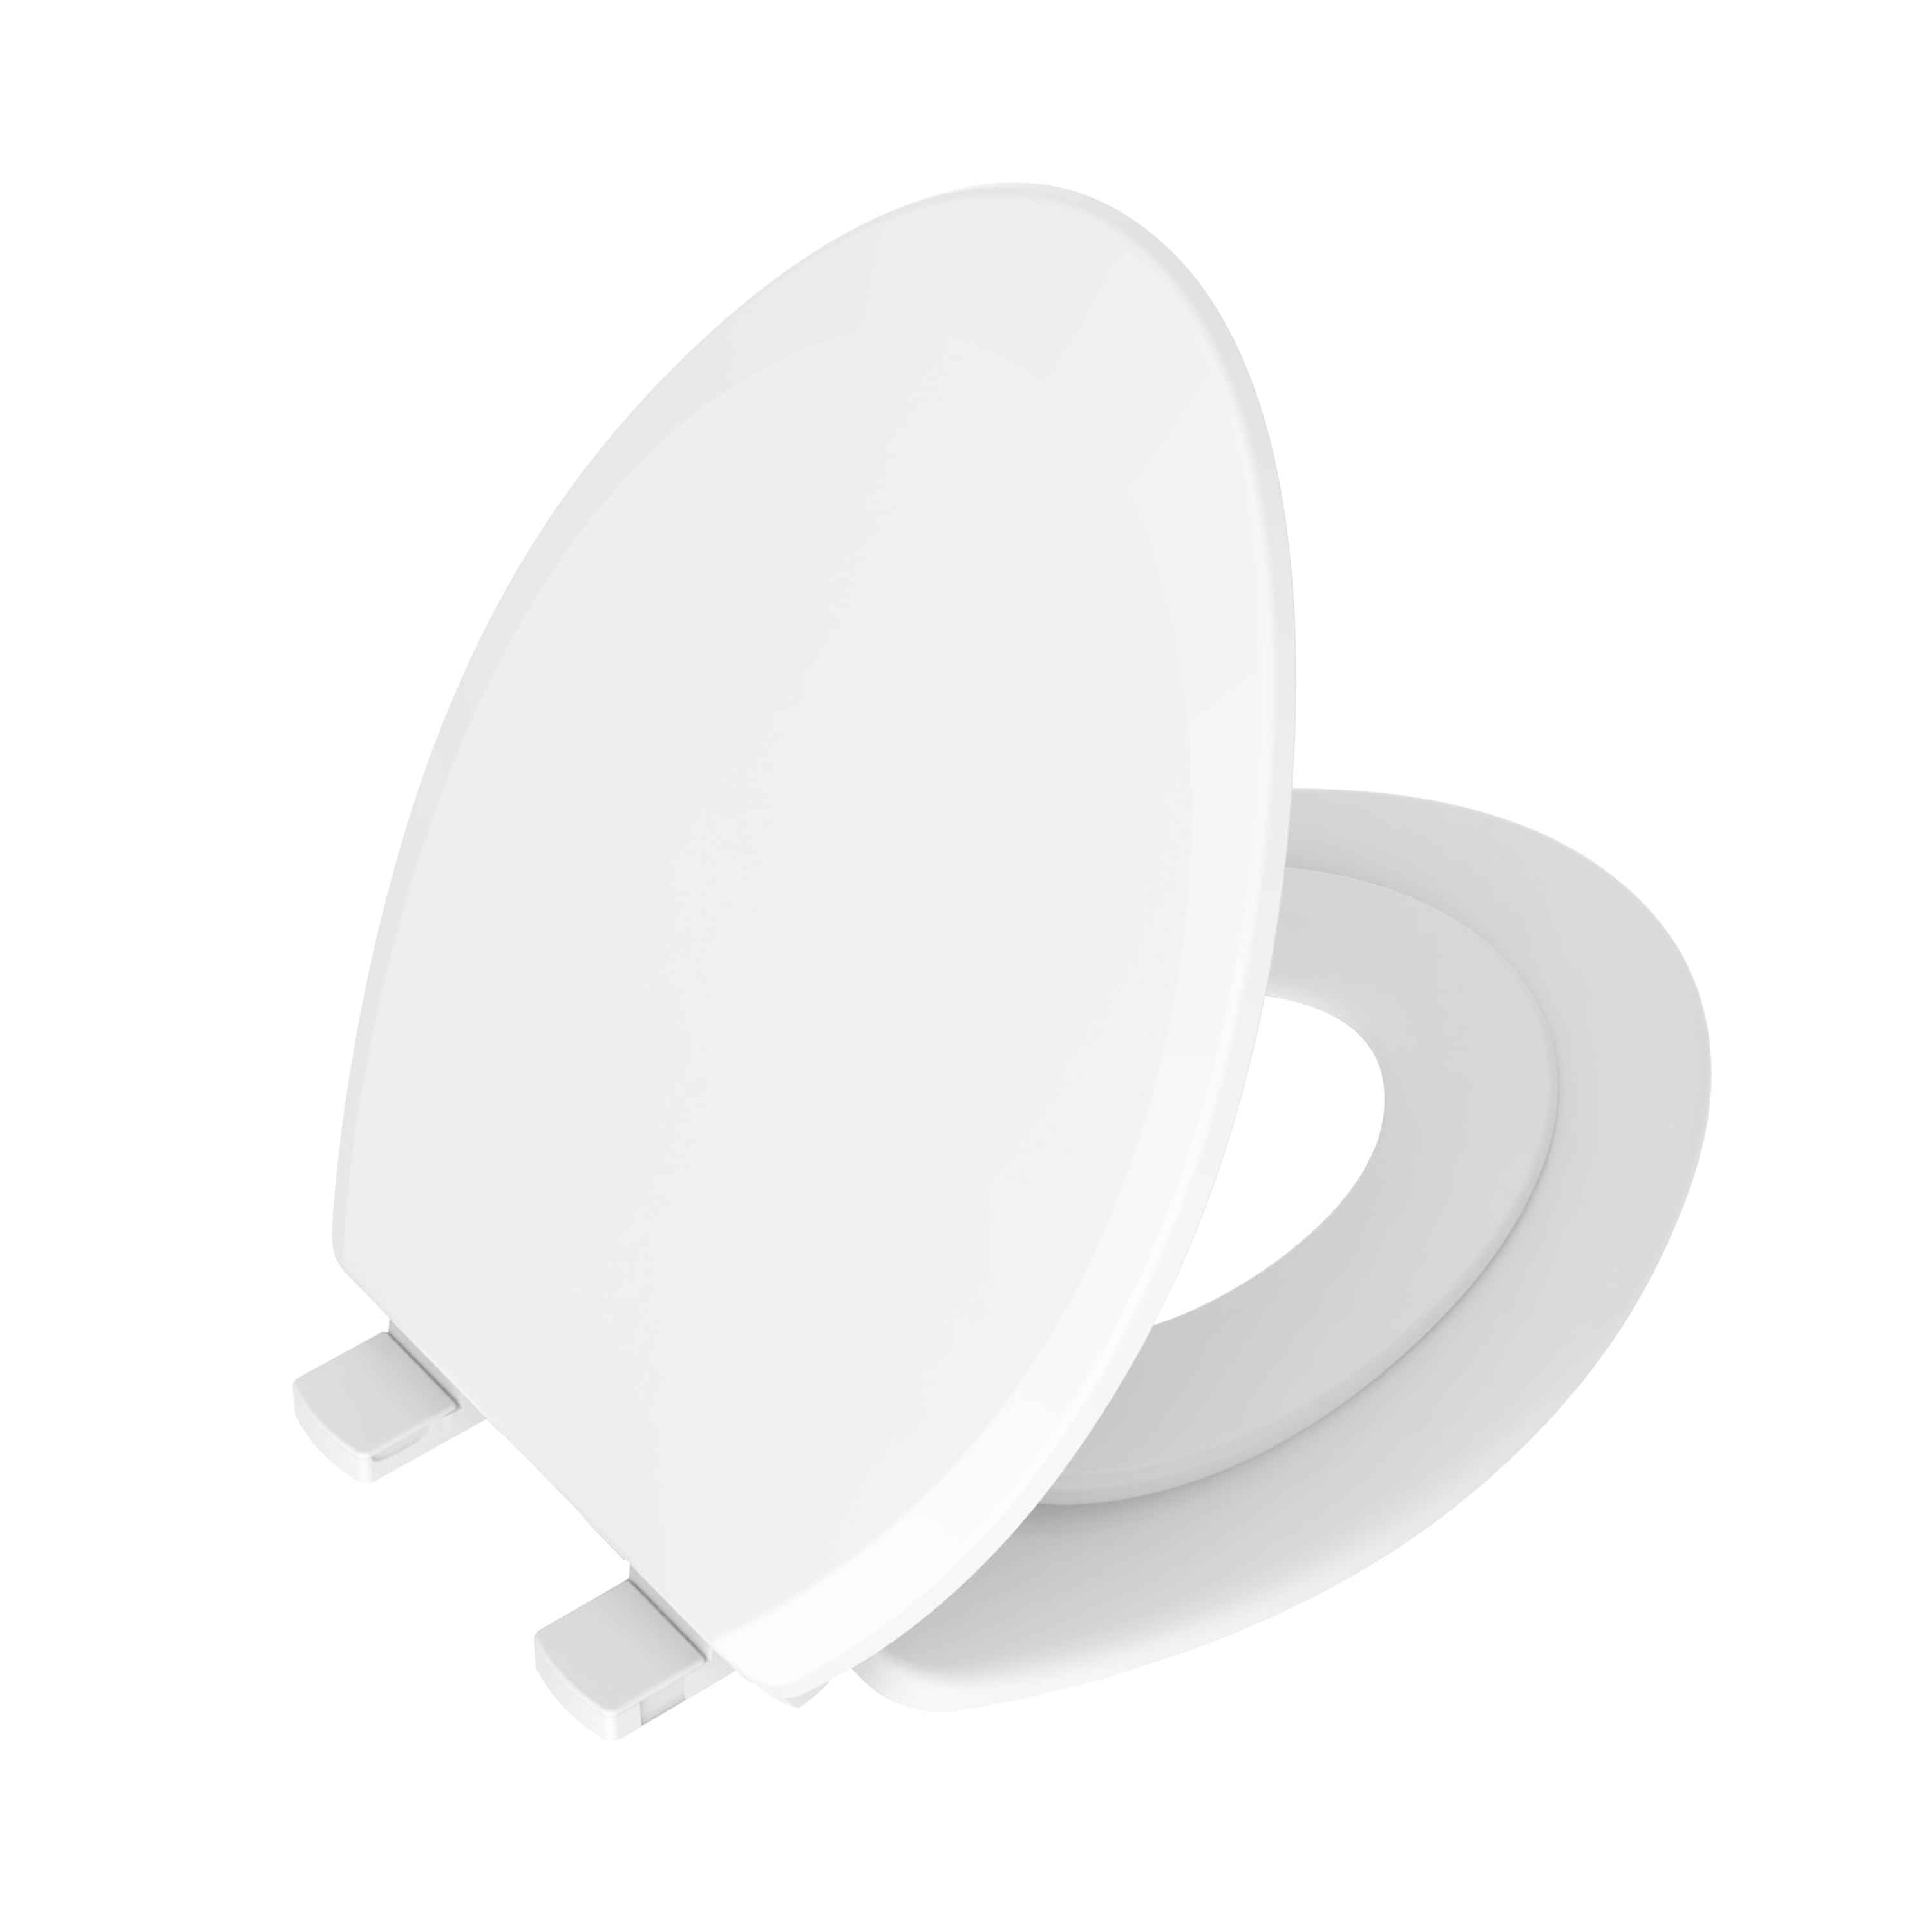 Mainstays Plastic Elongated 2-in-1 Potty Training Toilet Seat in Daisy White - Walmart.com $15.47